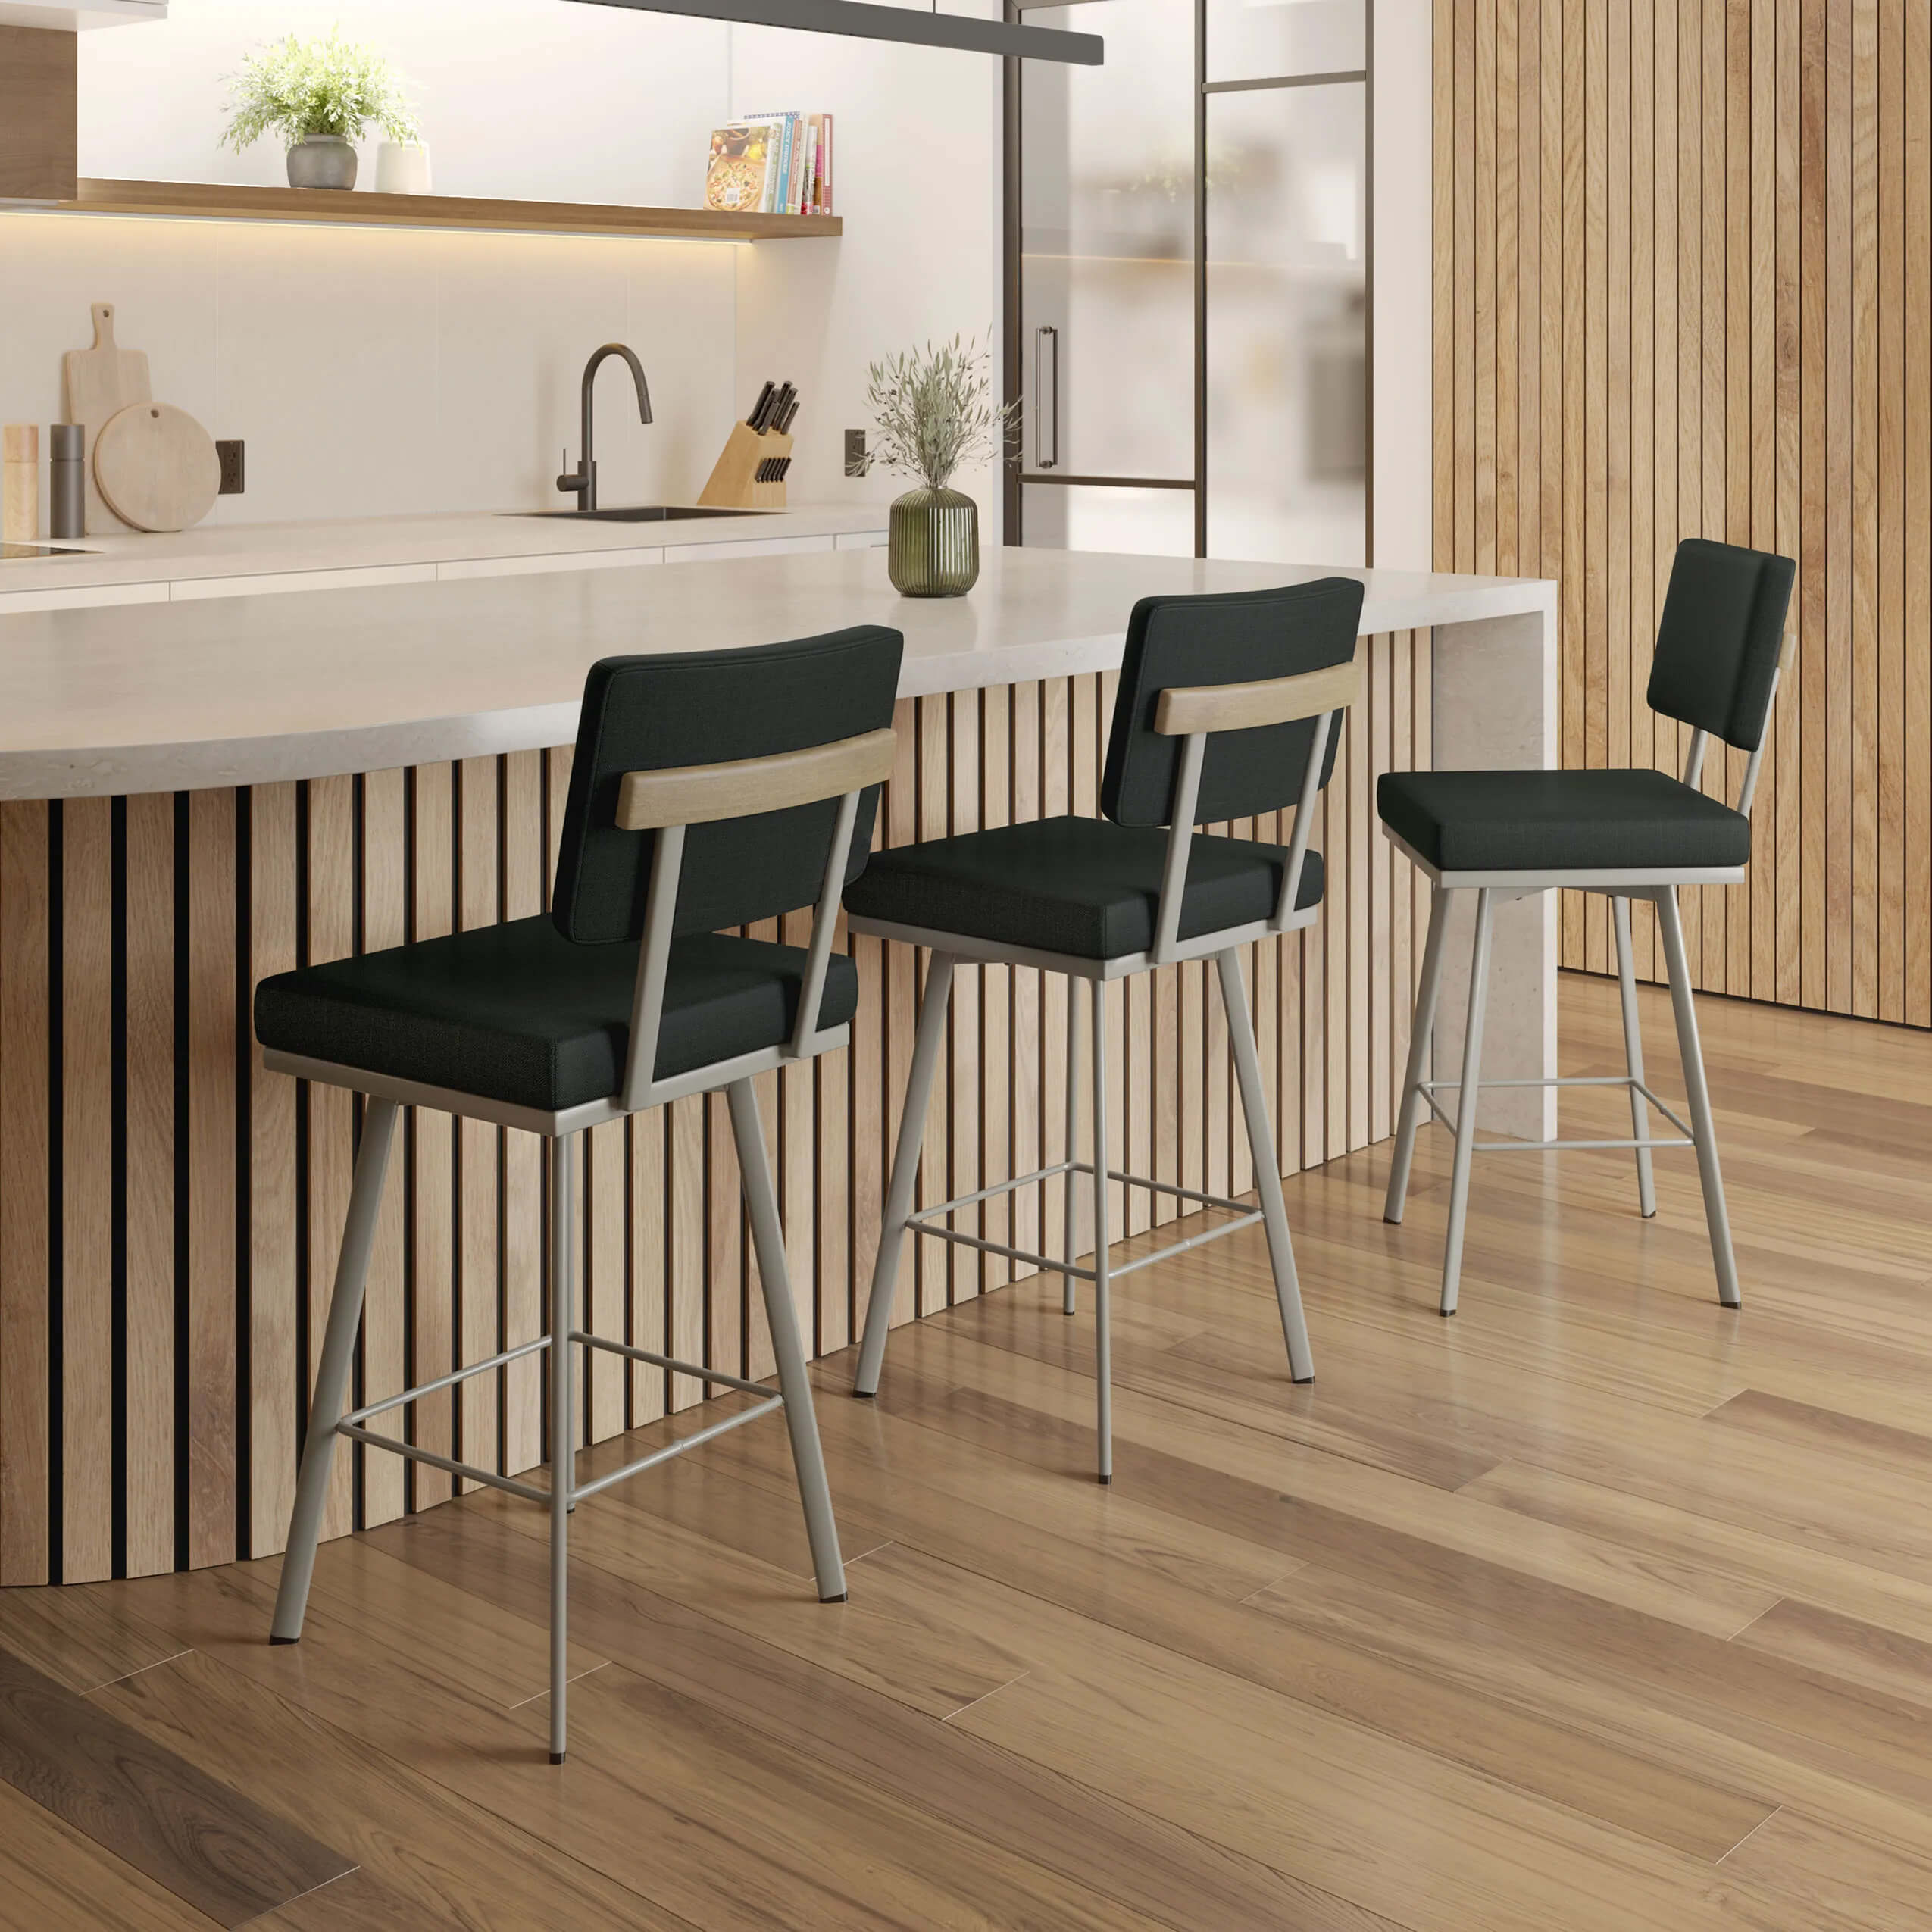 Amisco's Wesley Metal Swivel Conter Stool in Modern Kitchen Design